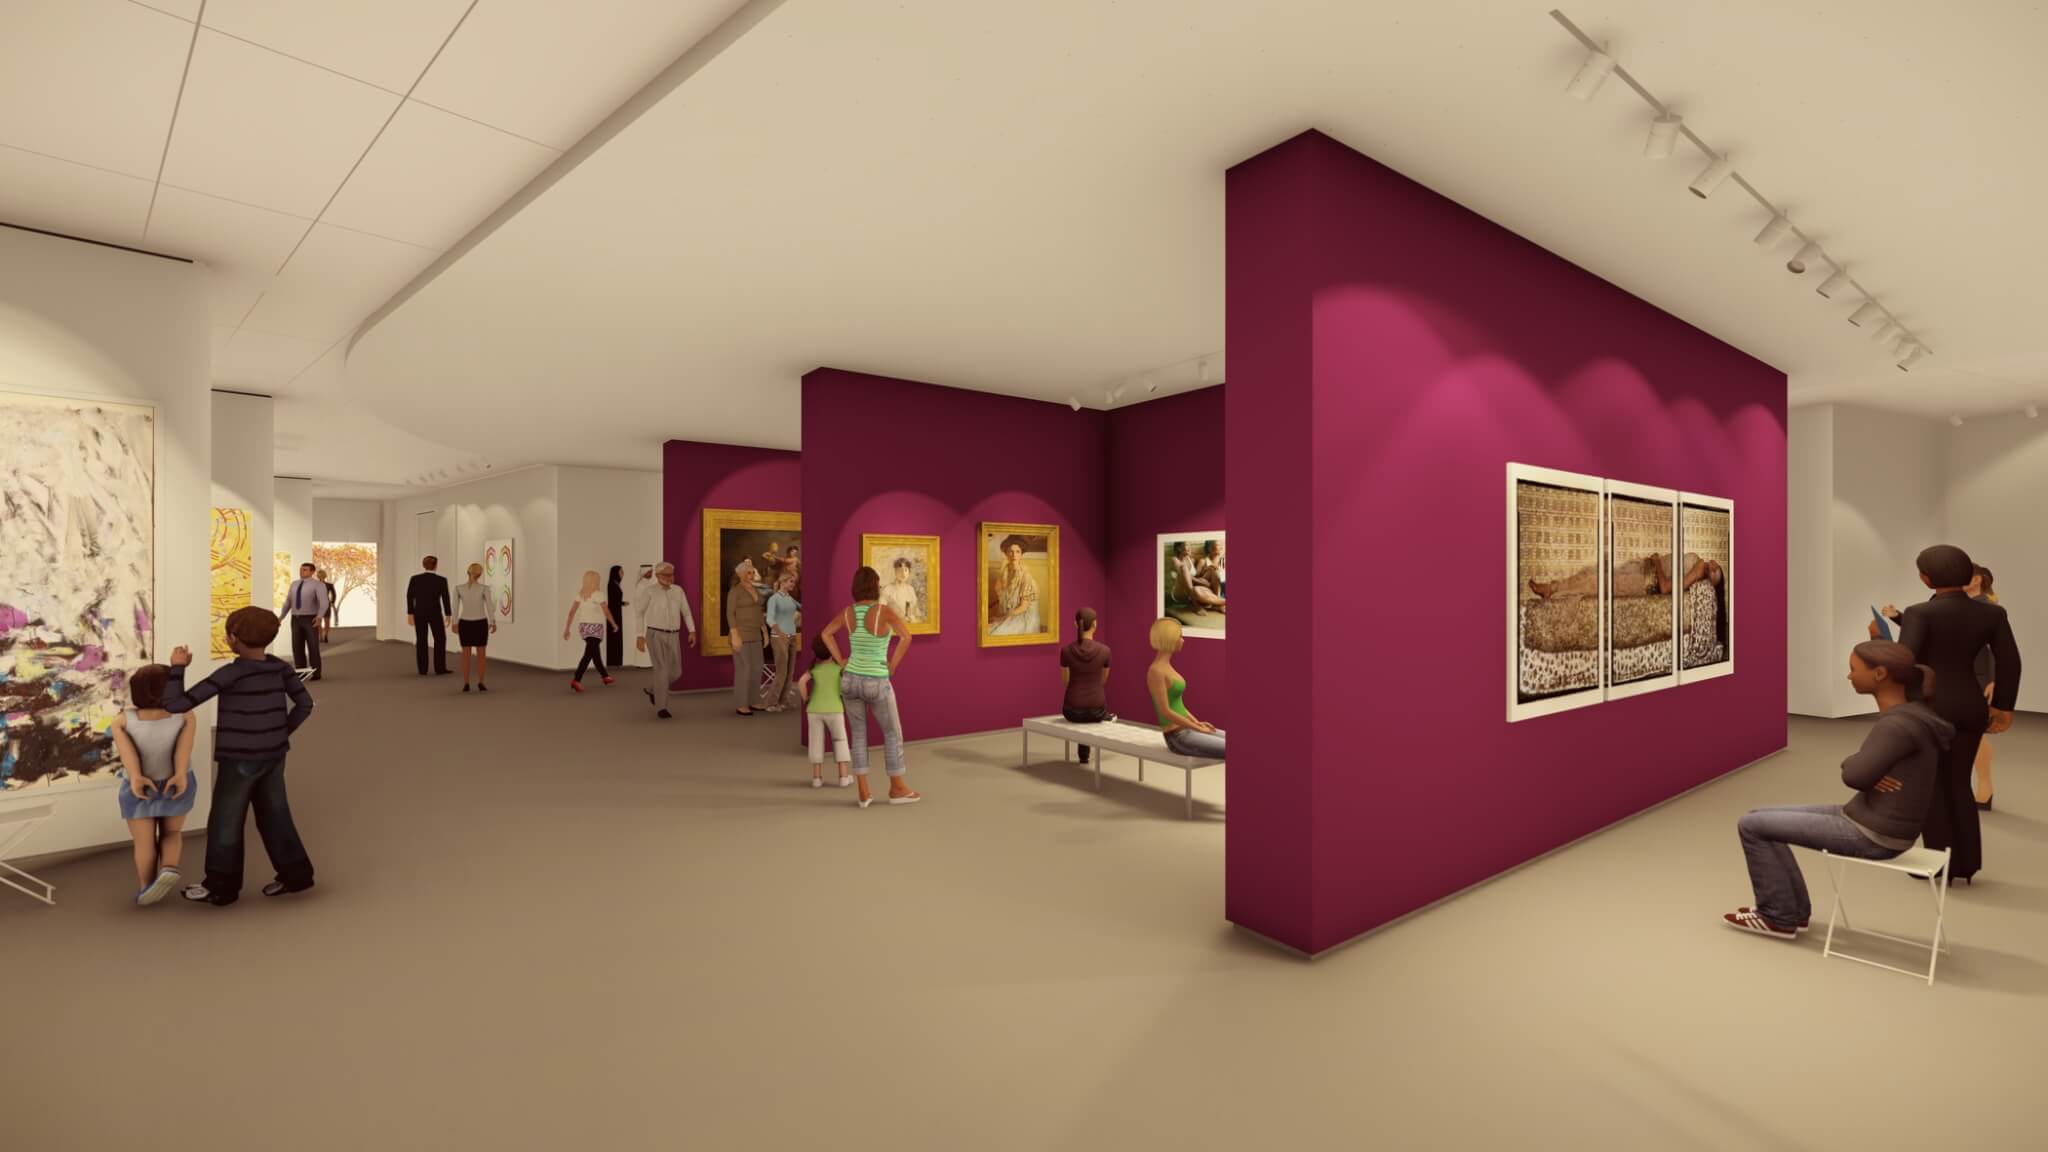 A digital rendering shows a museum gallery space. White walls feature abstract paintings; magenta accent walls feature Impressionist paintings and contemporary photographs. The gallery is filled with guests of varied ages and genders observing the works and walking around.